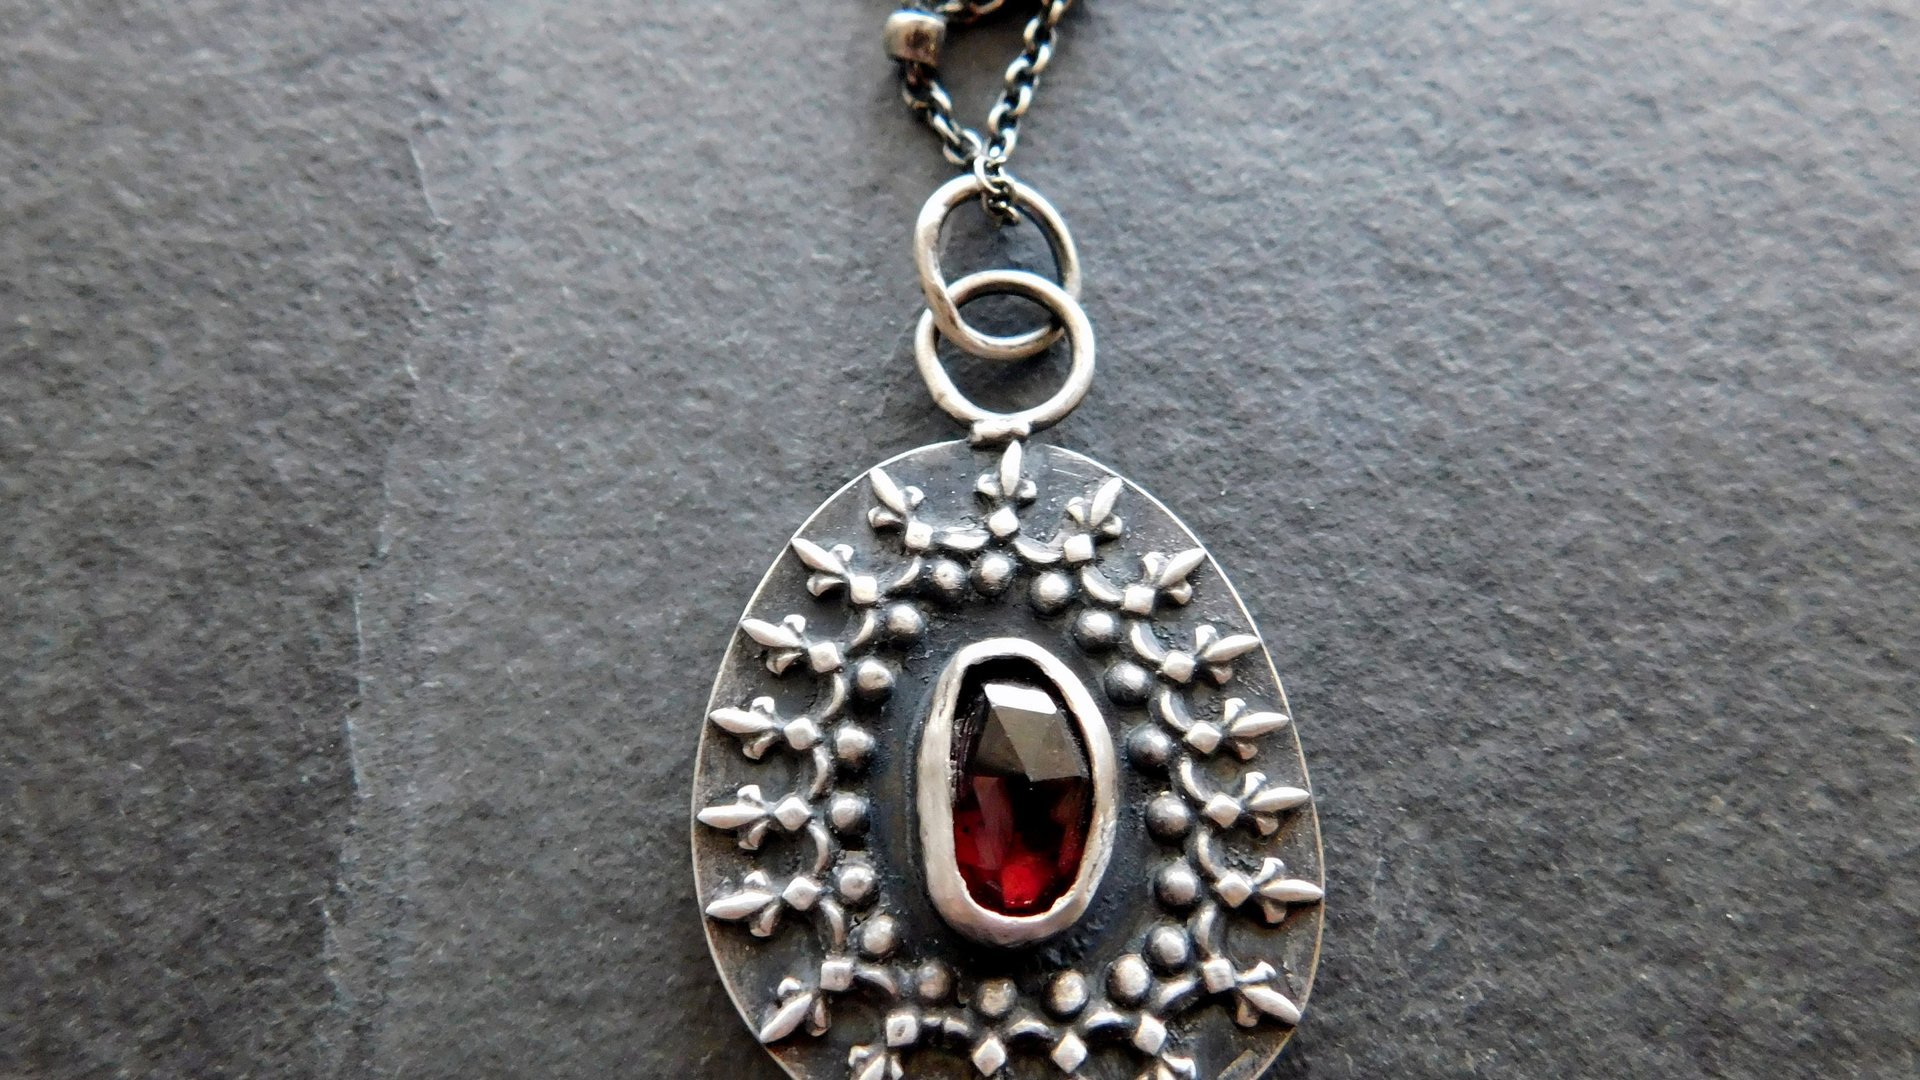 Deep Red Garnet Oxidized Sterling Silver Ornate Wire Pendant Necklace